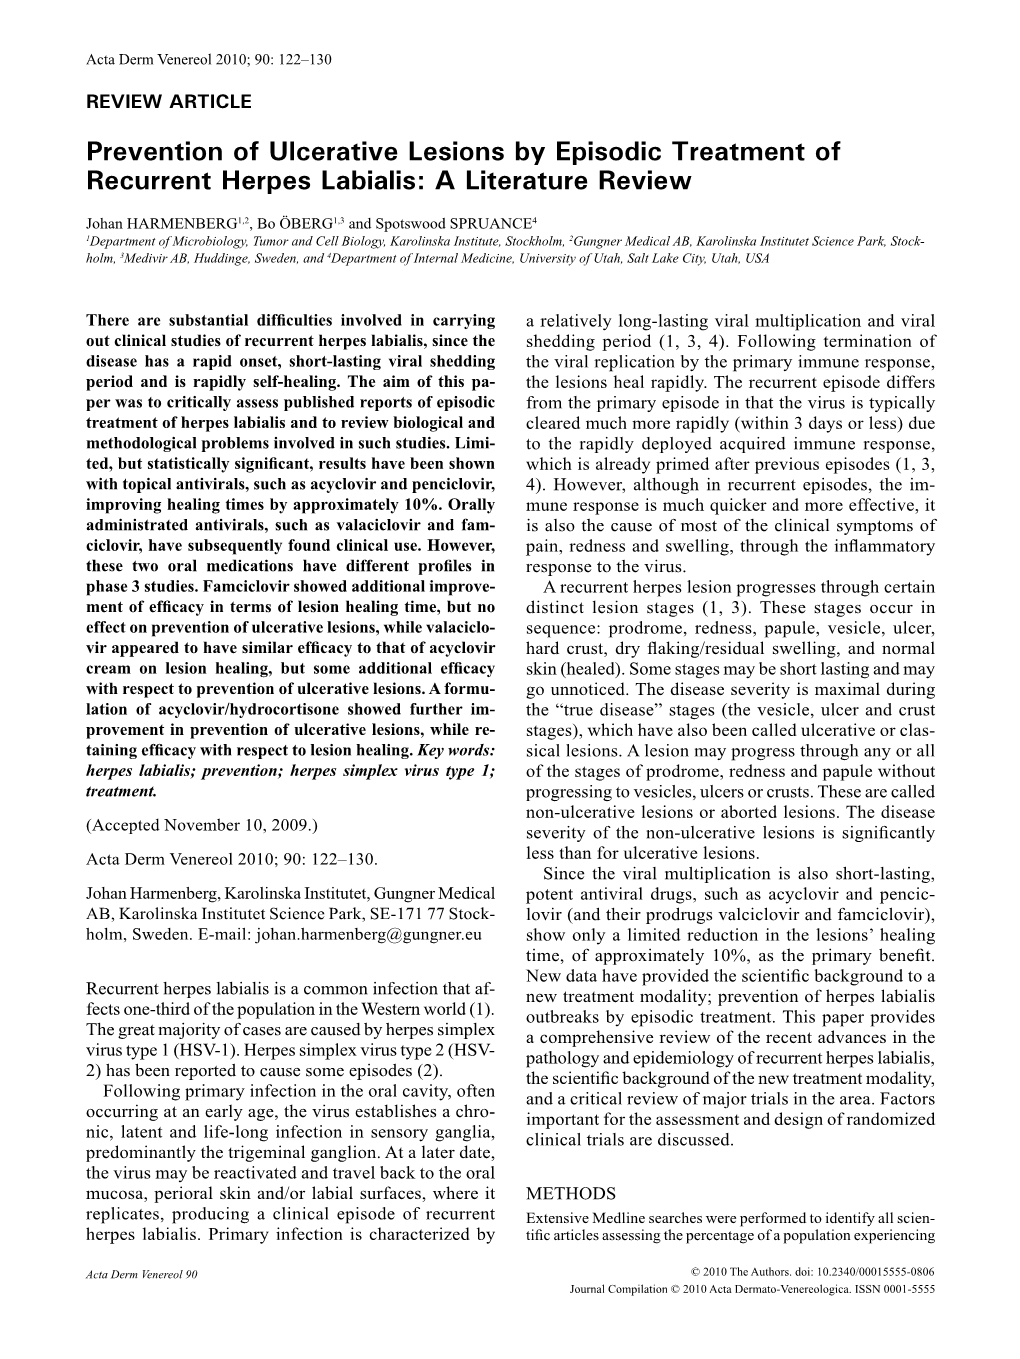 Prevention of Ulcerative Lesions by Episodic Treatment of Recurrent Herpes Labialis: a Literature Review